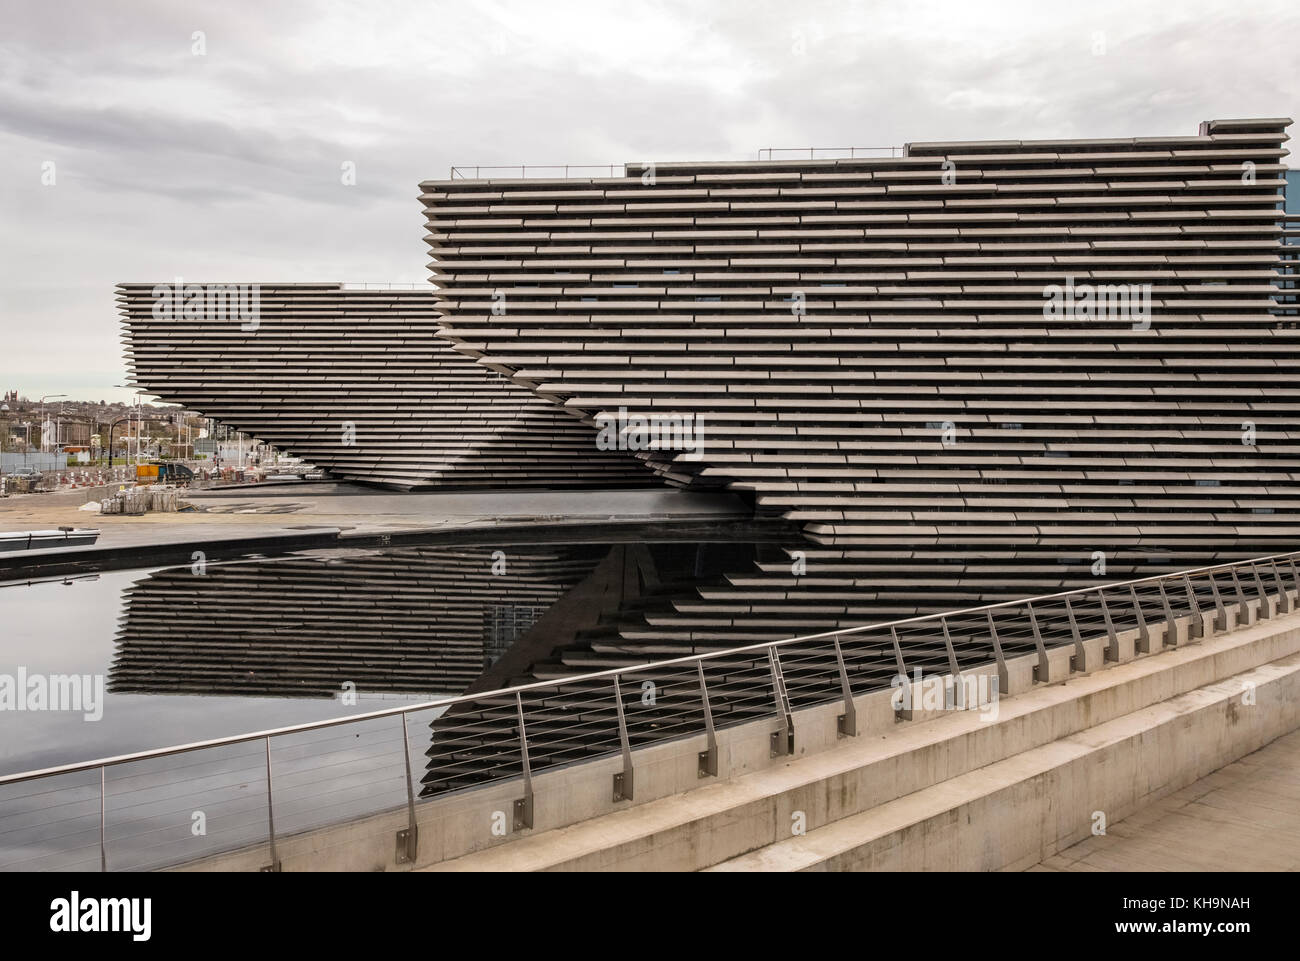 DUNDEE, SCOTLAND, OCTOBER 29, 2017: The new Victoria and Albert Museum of Design, reaches the last phase of development before opening in 2018 Stock Photo